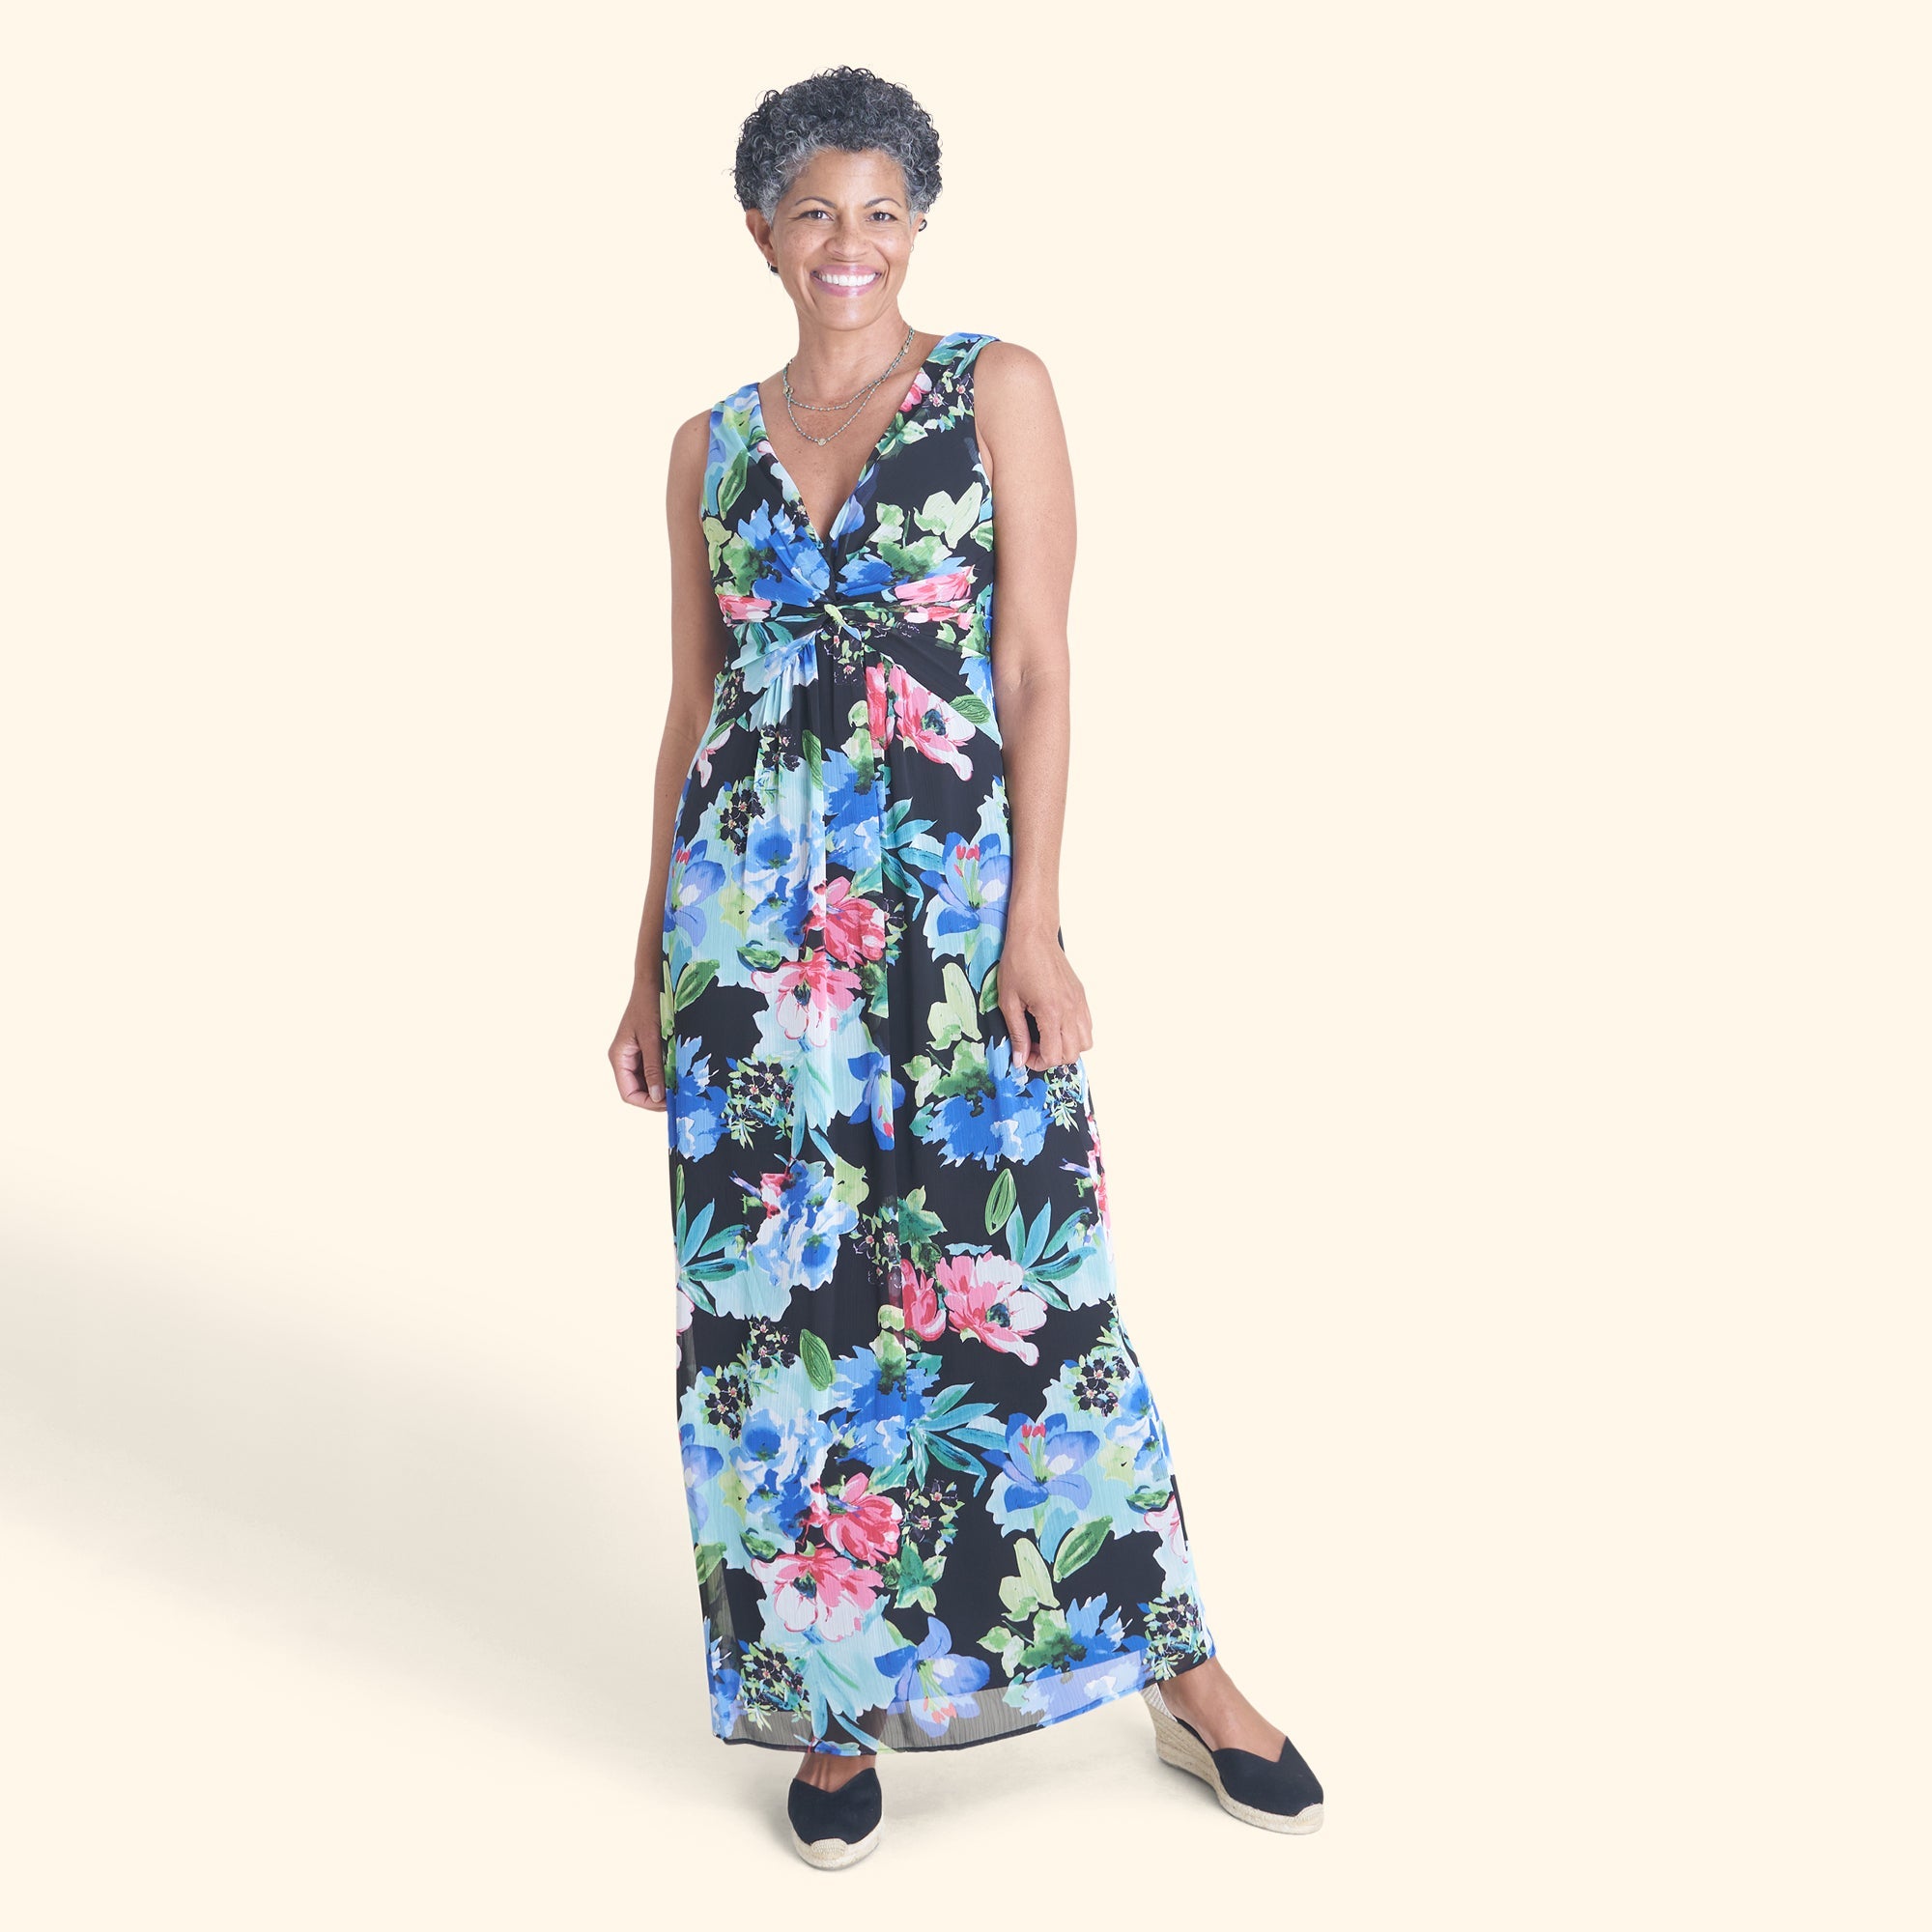 Woman posing wearing Black Reese Floral Print Maxi Dress from Connected Apparel